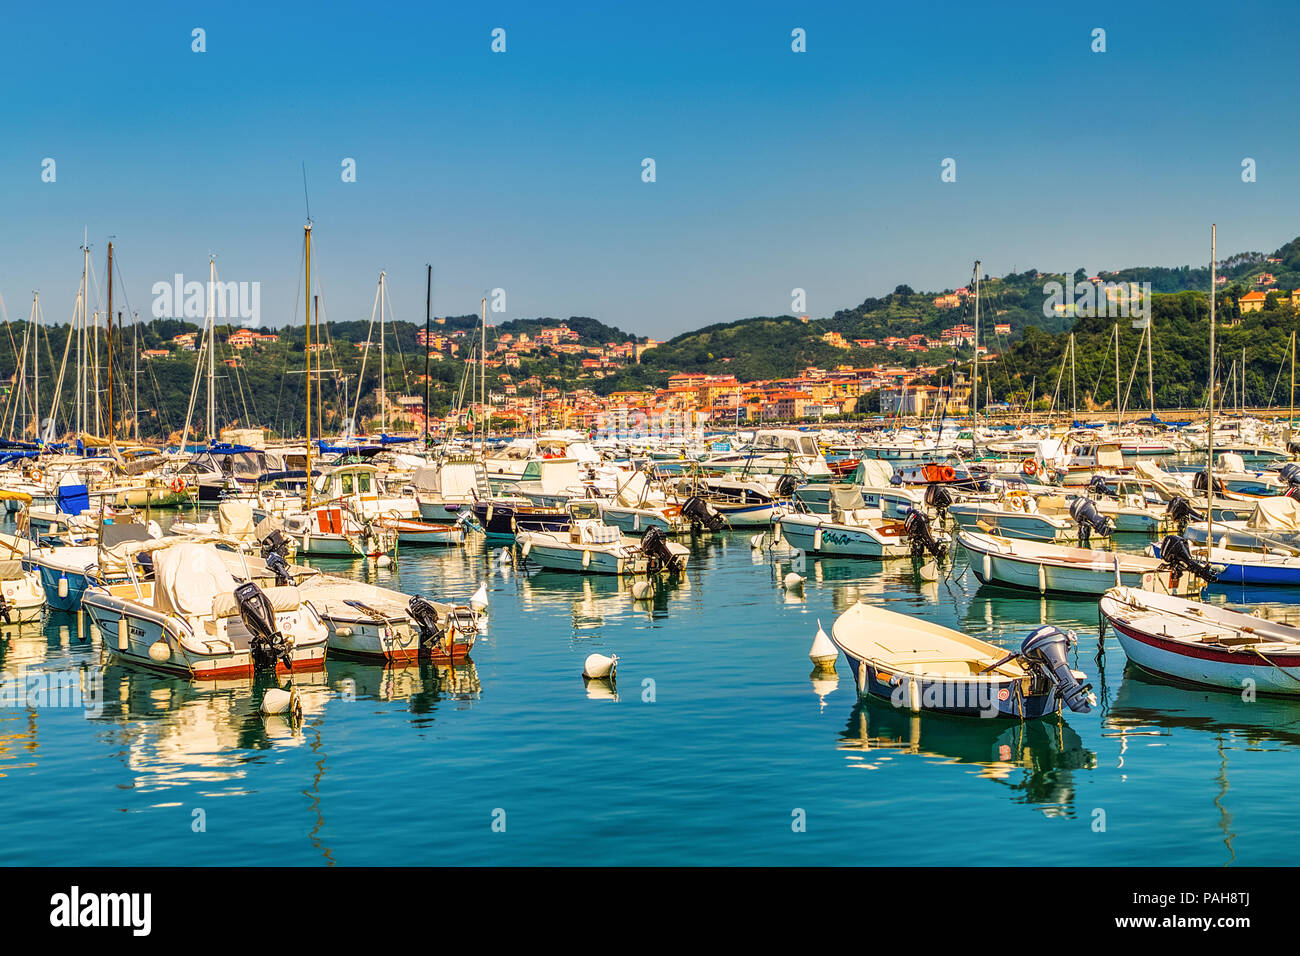 LERICI (SP), ITALY - JUNE 21, 2018: The waters are wetting the hulls of the boats in the marina of Lerici Stock Photo